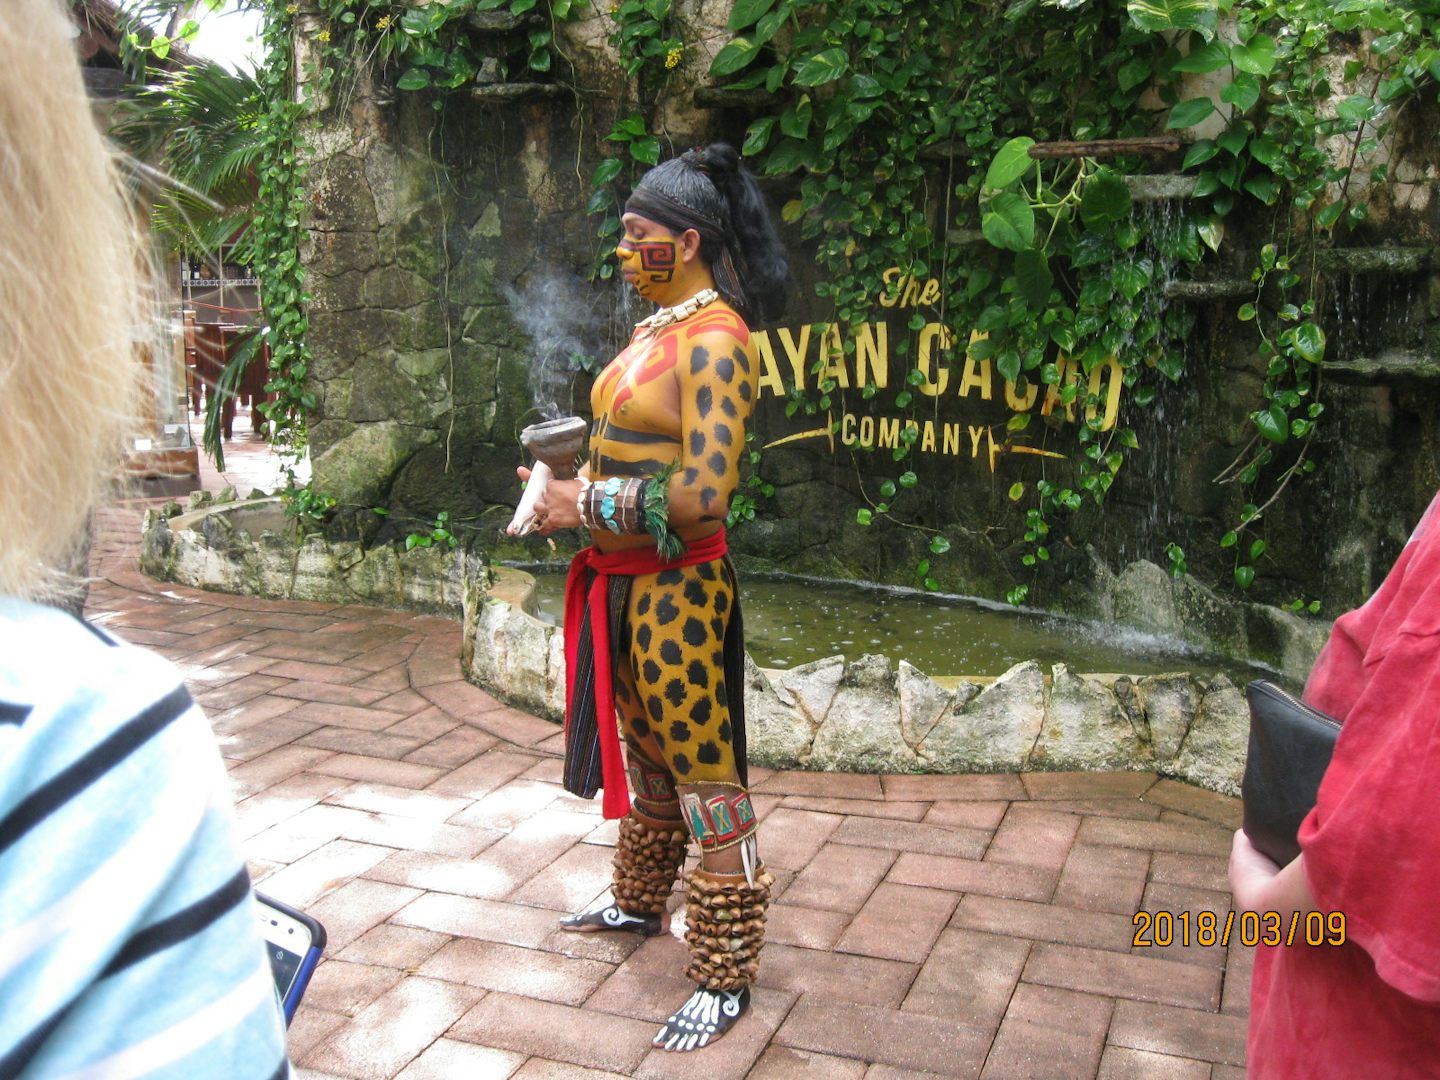 At the Mayan Cacao Company we receive a traditional blessing from a Mayan m